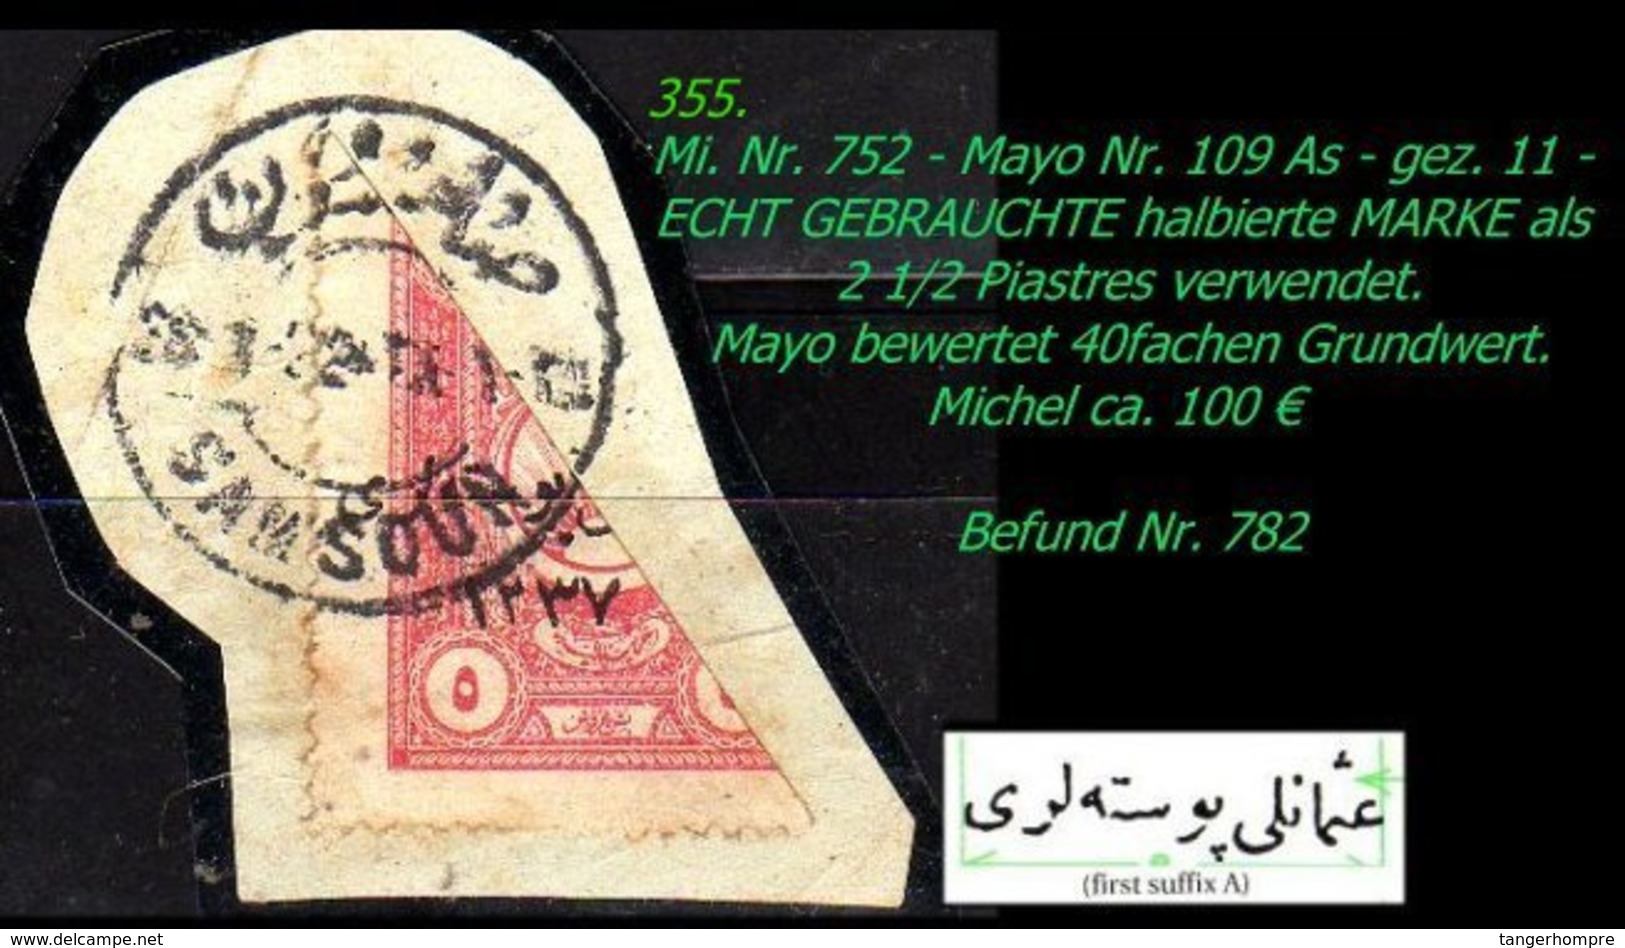 EARLY OTTOMAN SPECIALIZED FOR SPECIALIST, SEE...Mi. Nr. 752 - Mayo 109 As - Halbierung -R- - 1920-21 Kleinasien